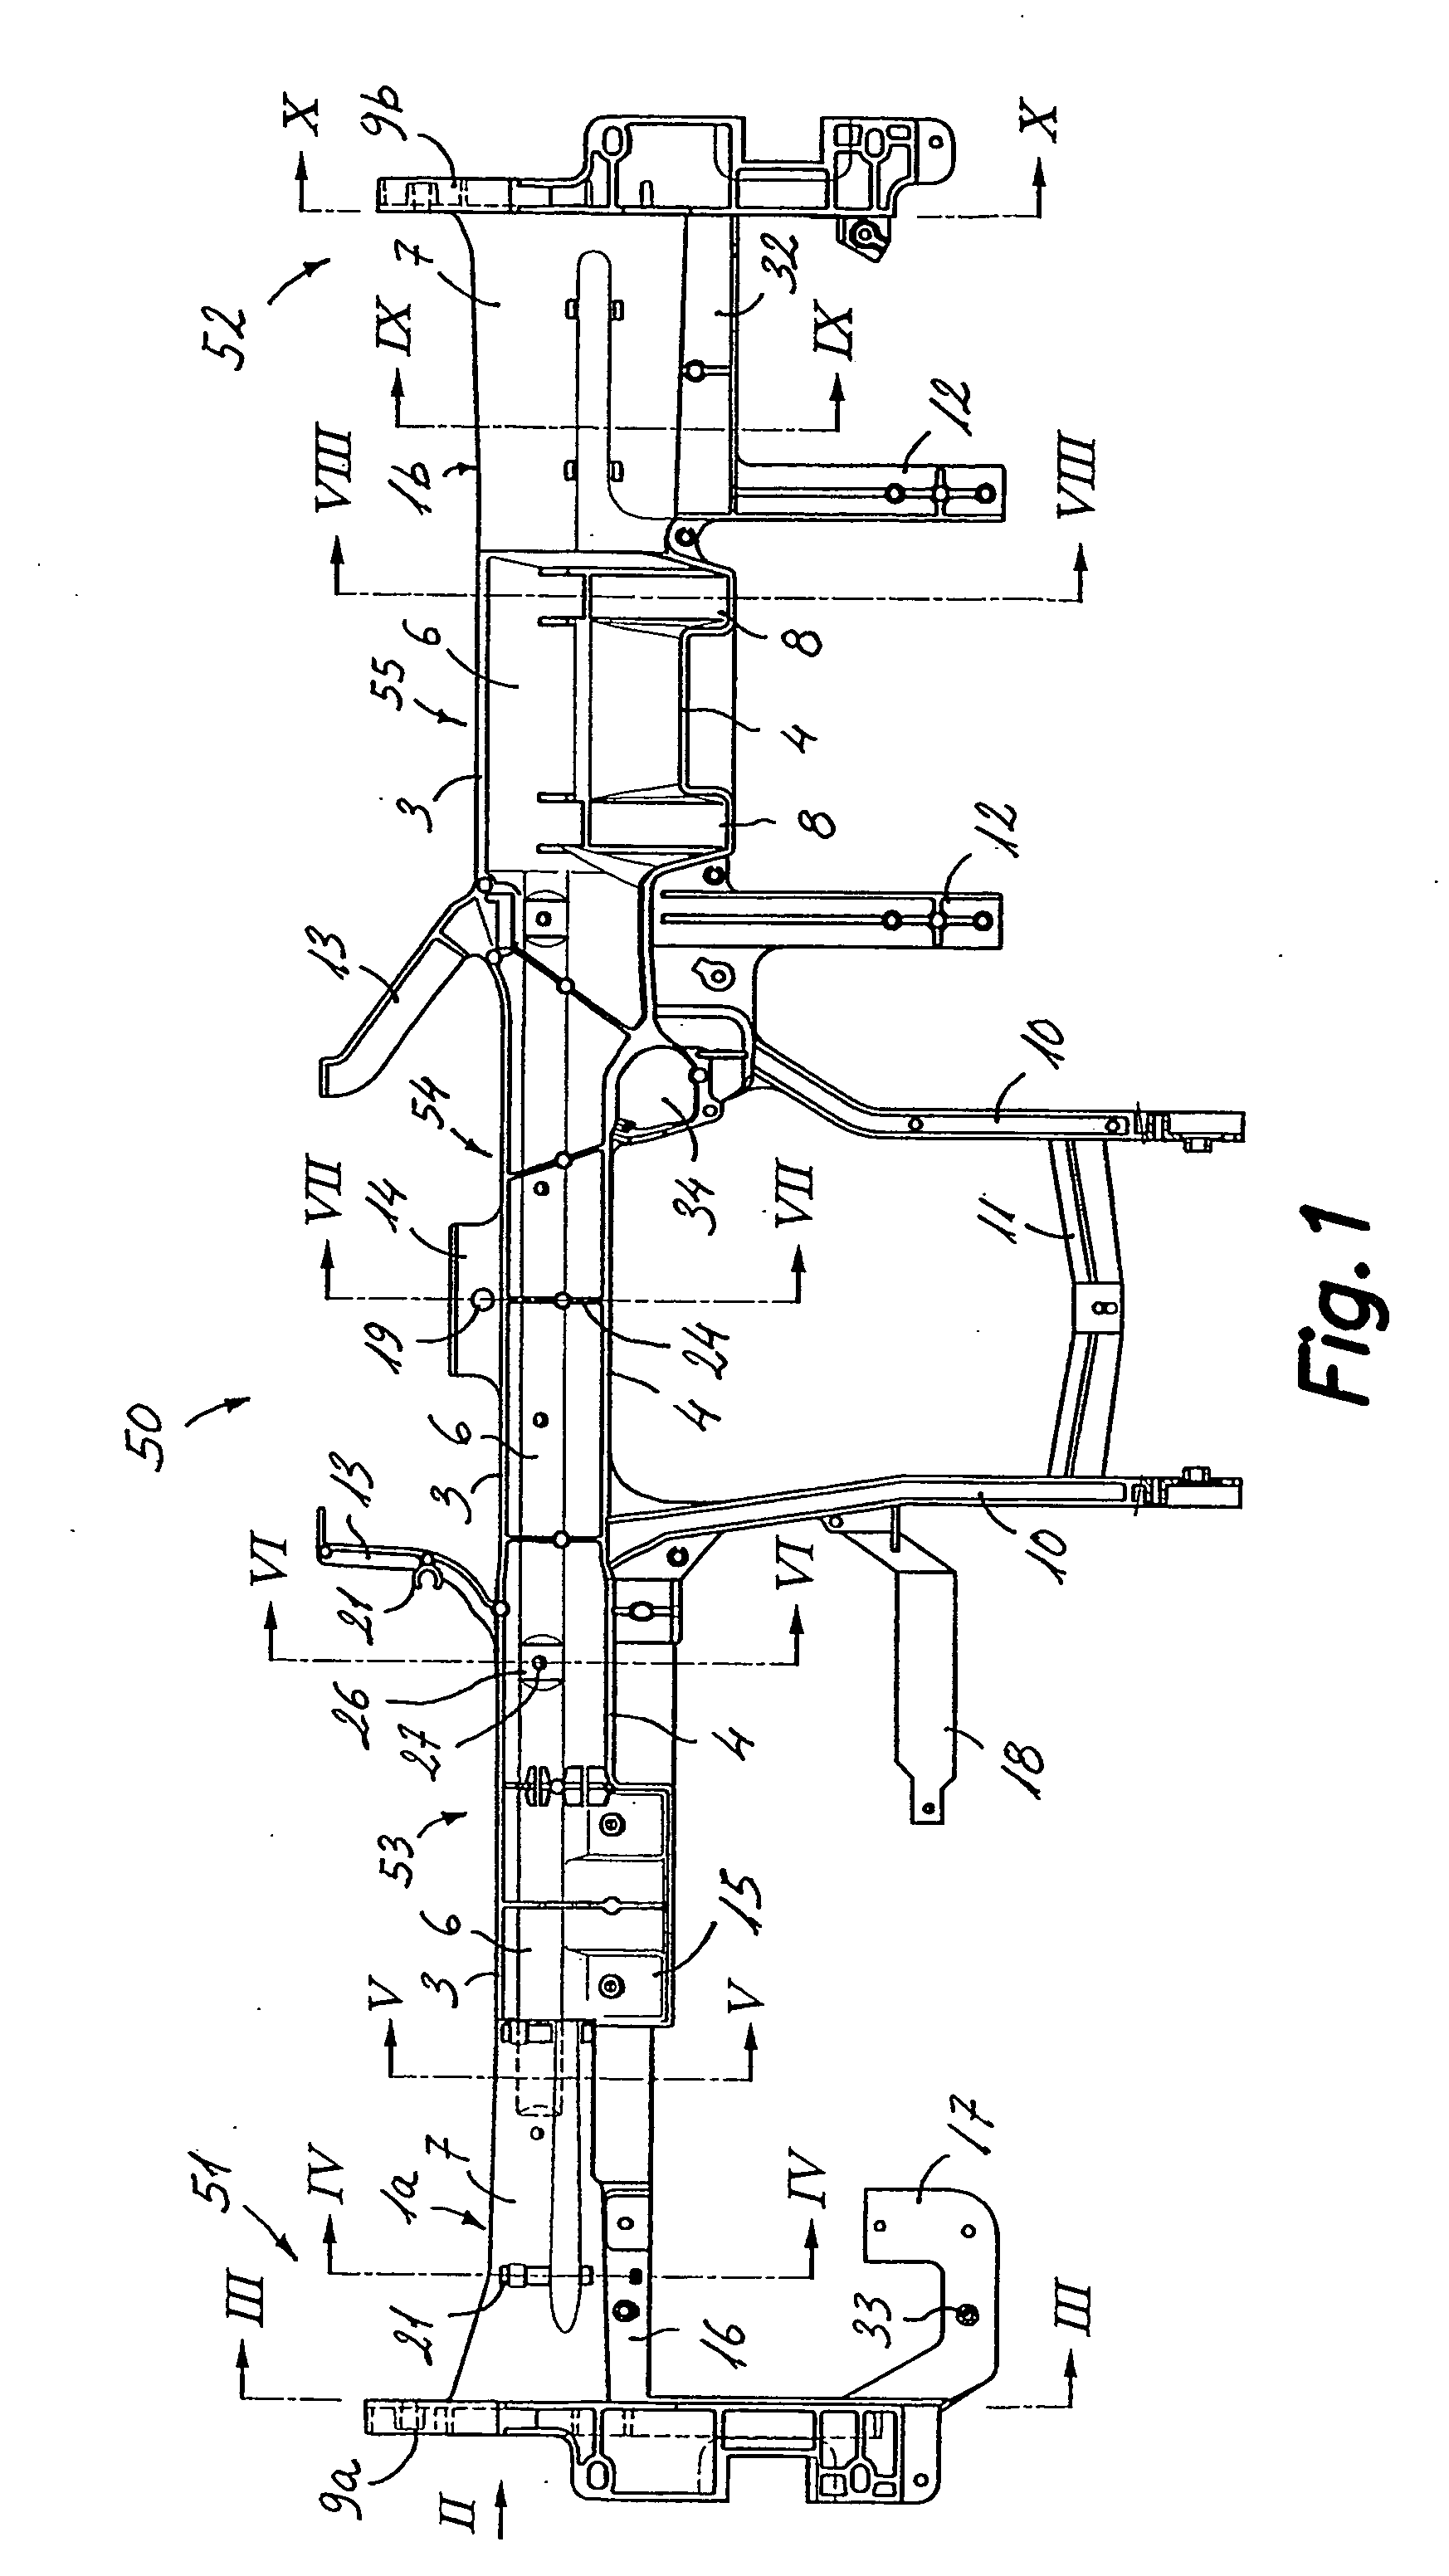 Support Crossbeam For An Instrument Panel